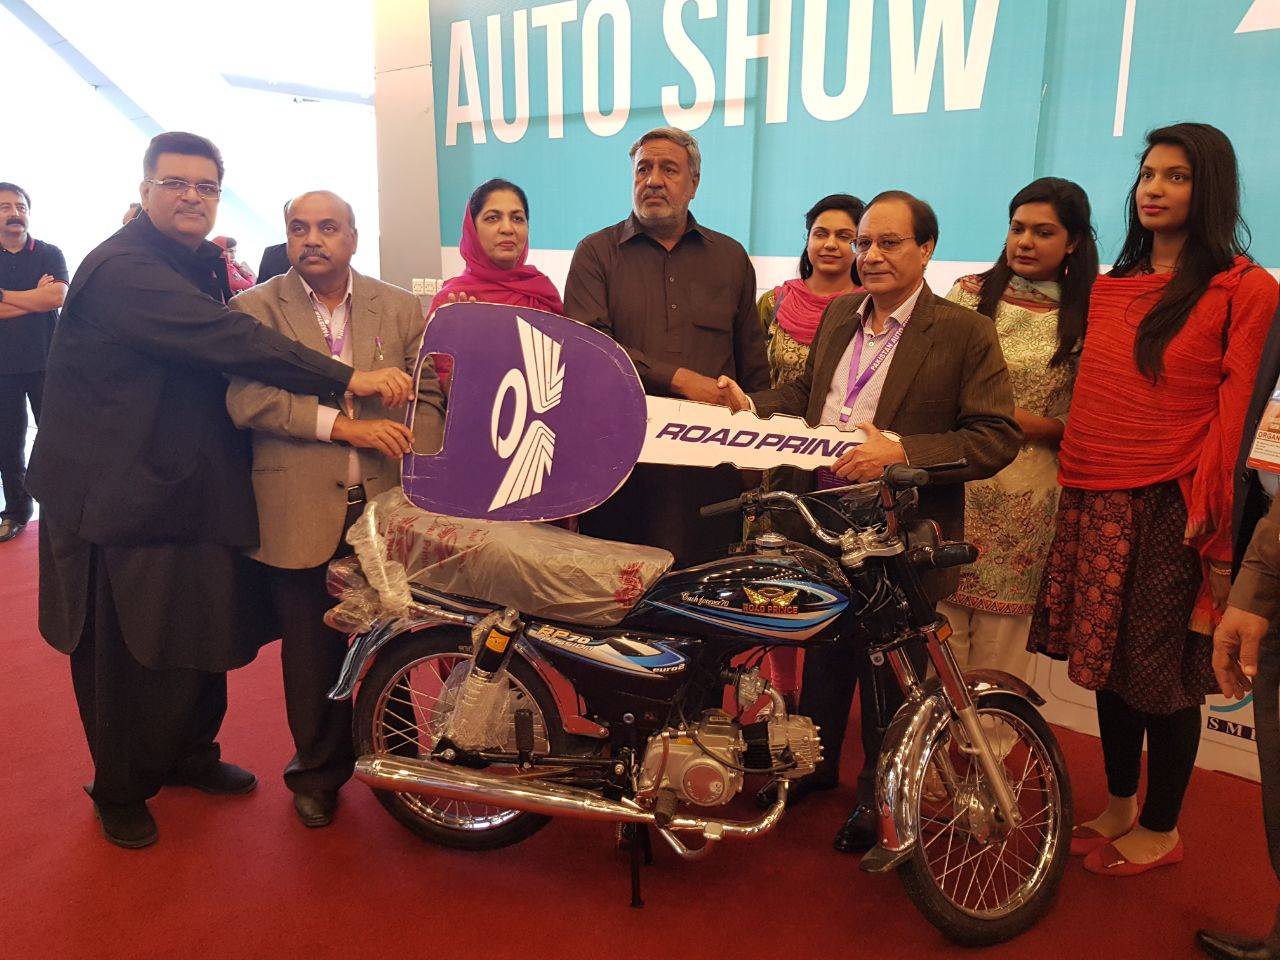 Pakistan Biggest Auto Show 2018 concludes with a huge turnout of 300,000 visitors